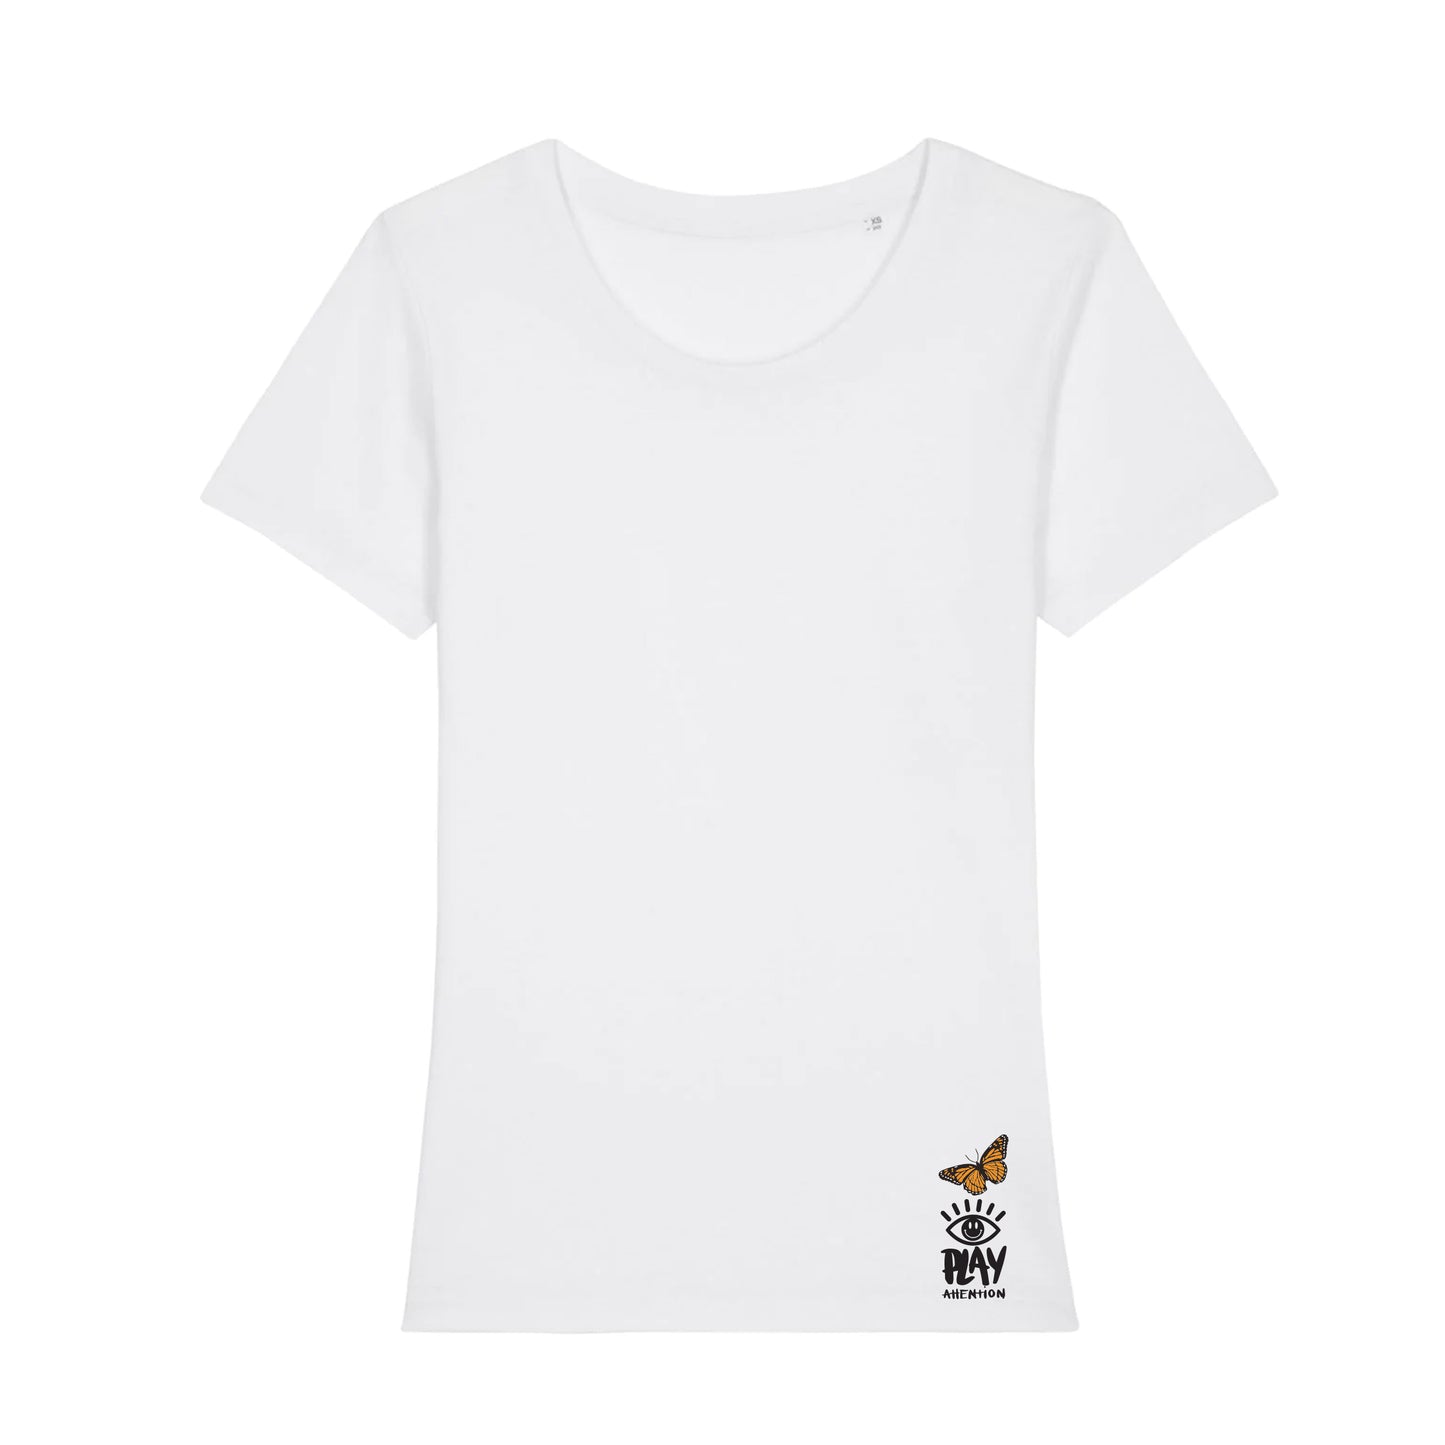 Secret Garden Party x Play Attention - Kissing Robots T-Shirt (White / Fitted T-Shirt)